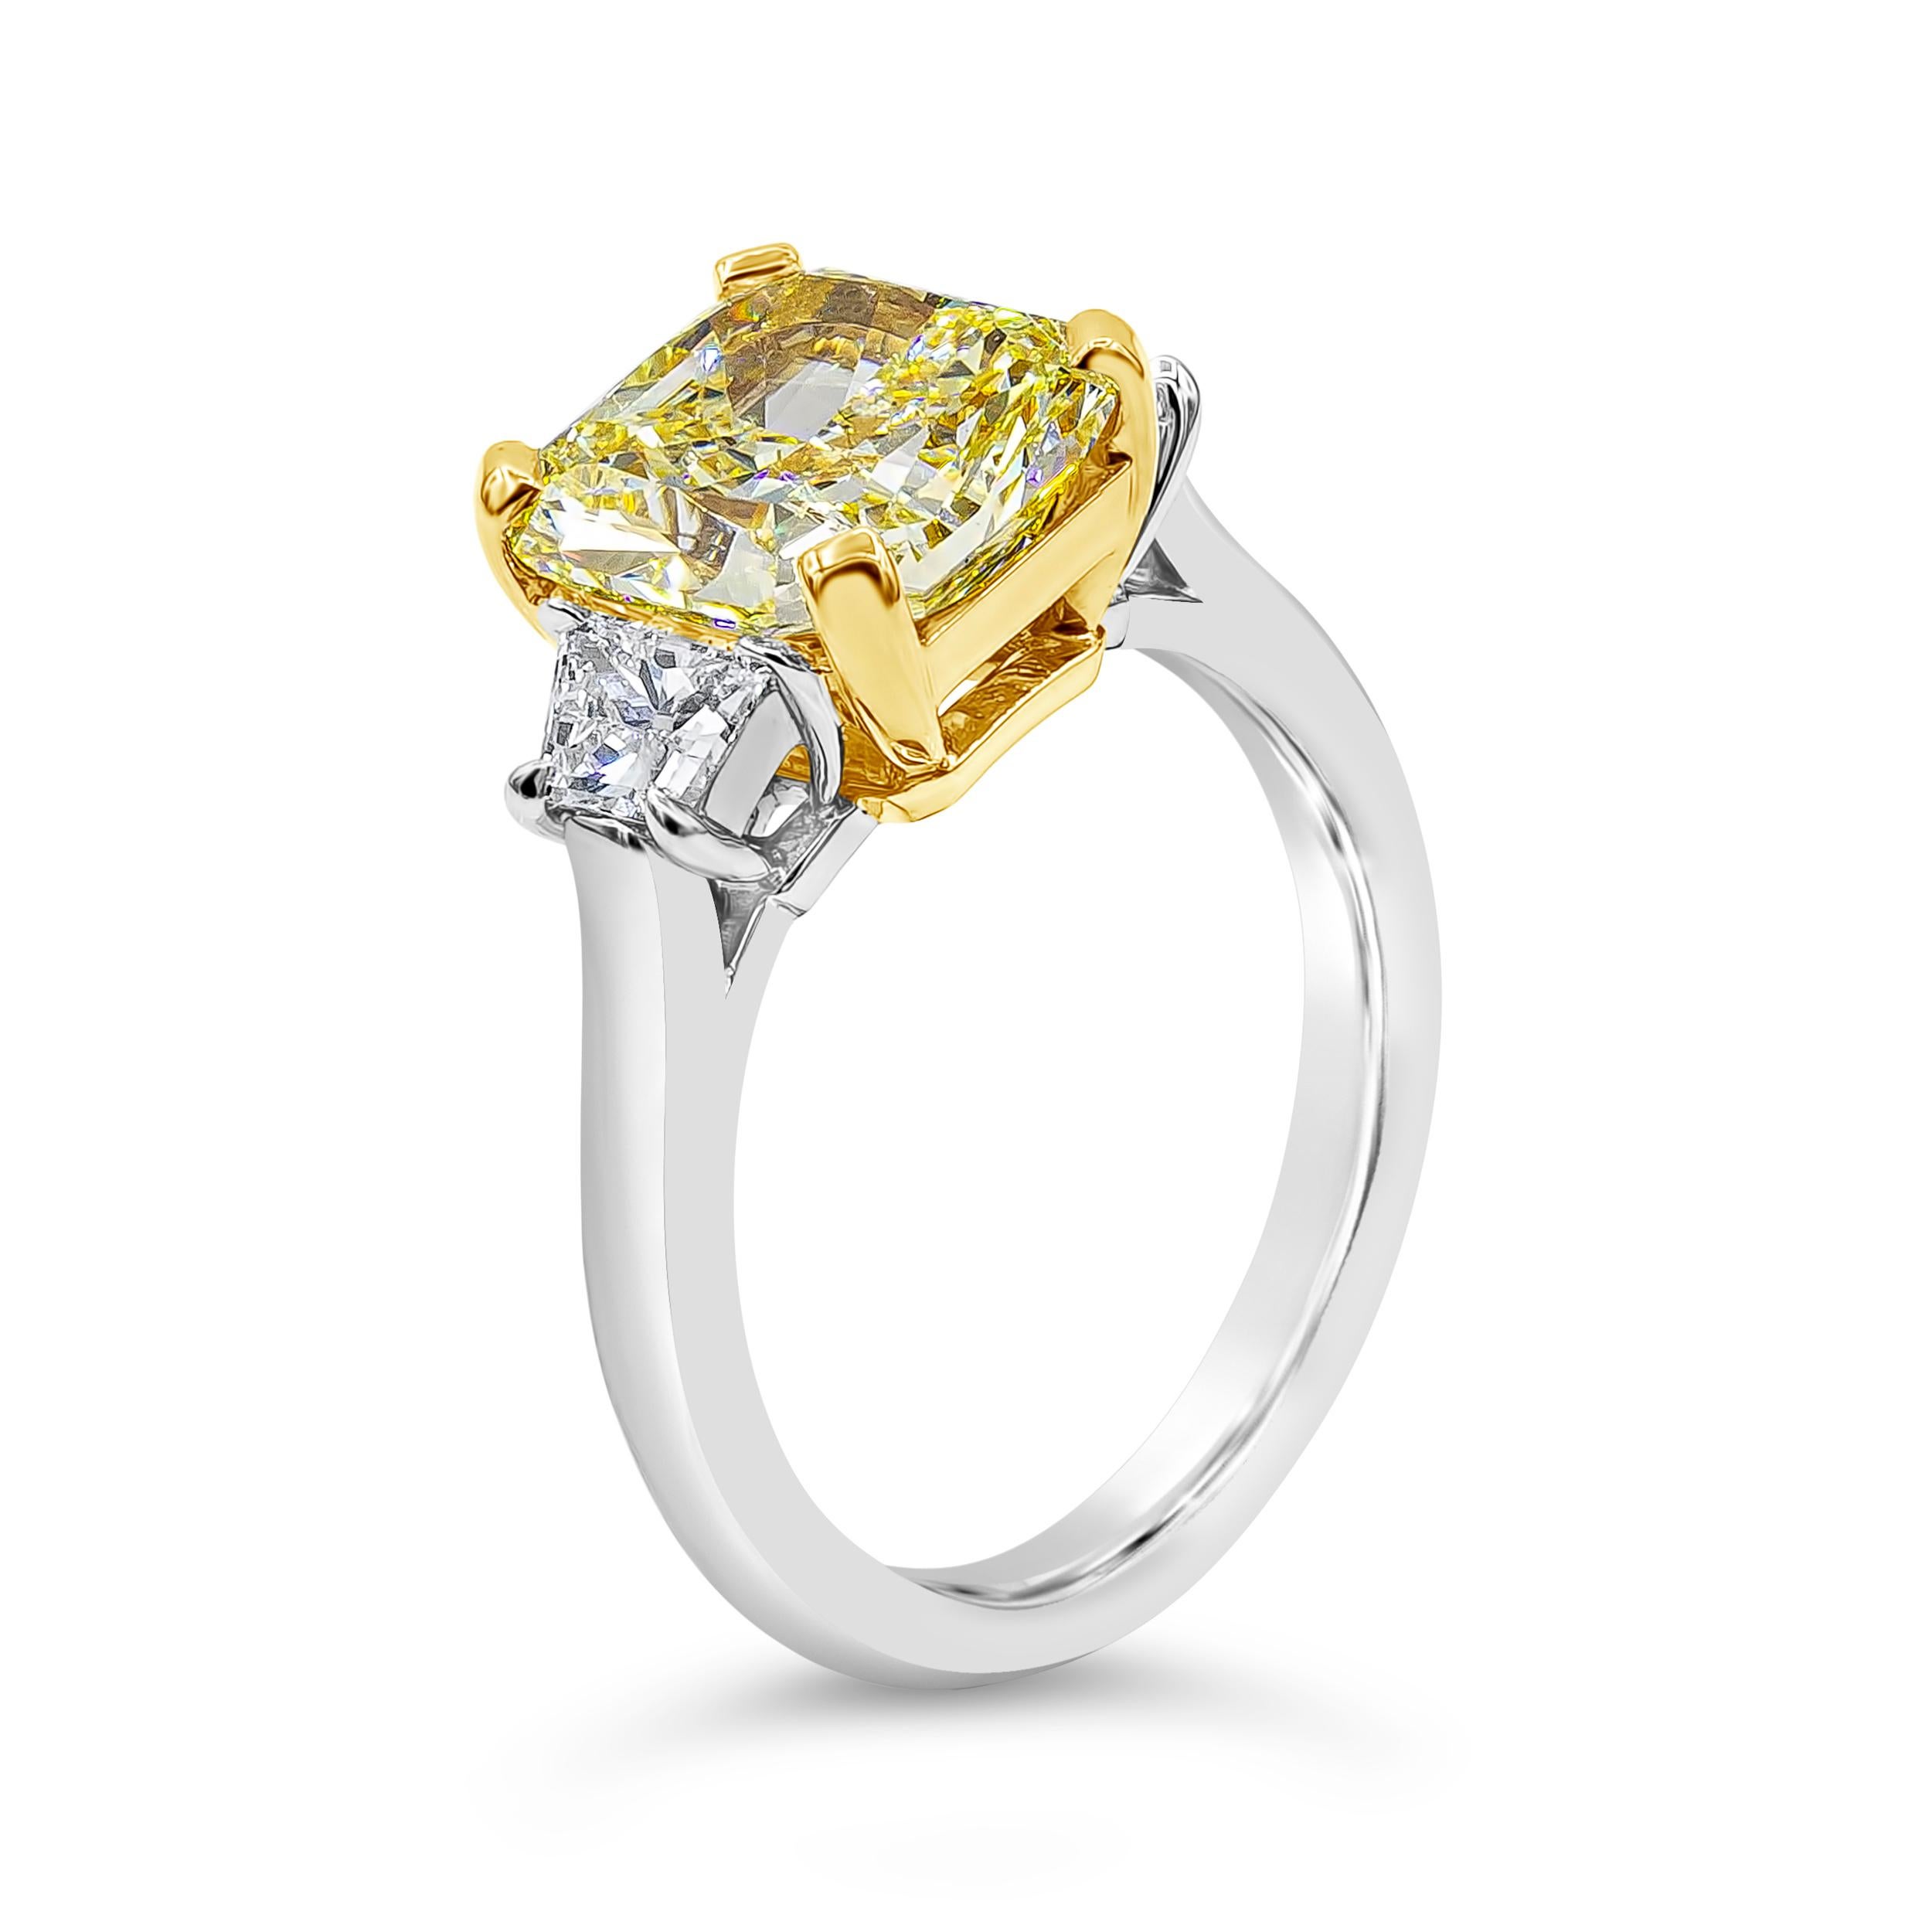 Contemporary GIA Certified 3.64 Carats Radiant Cut Intense Yellow Diamond Engagement Ring For Sale